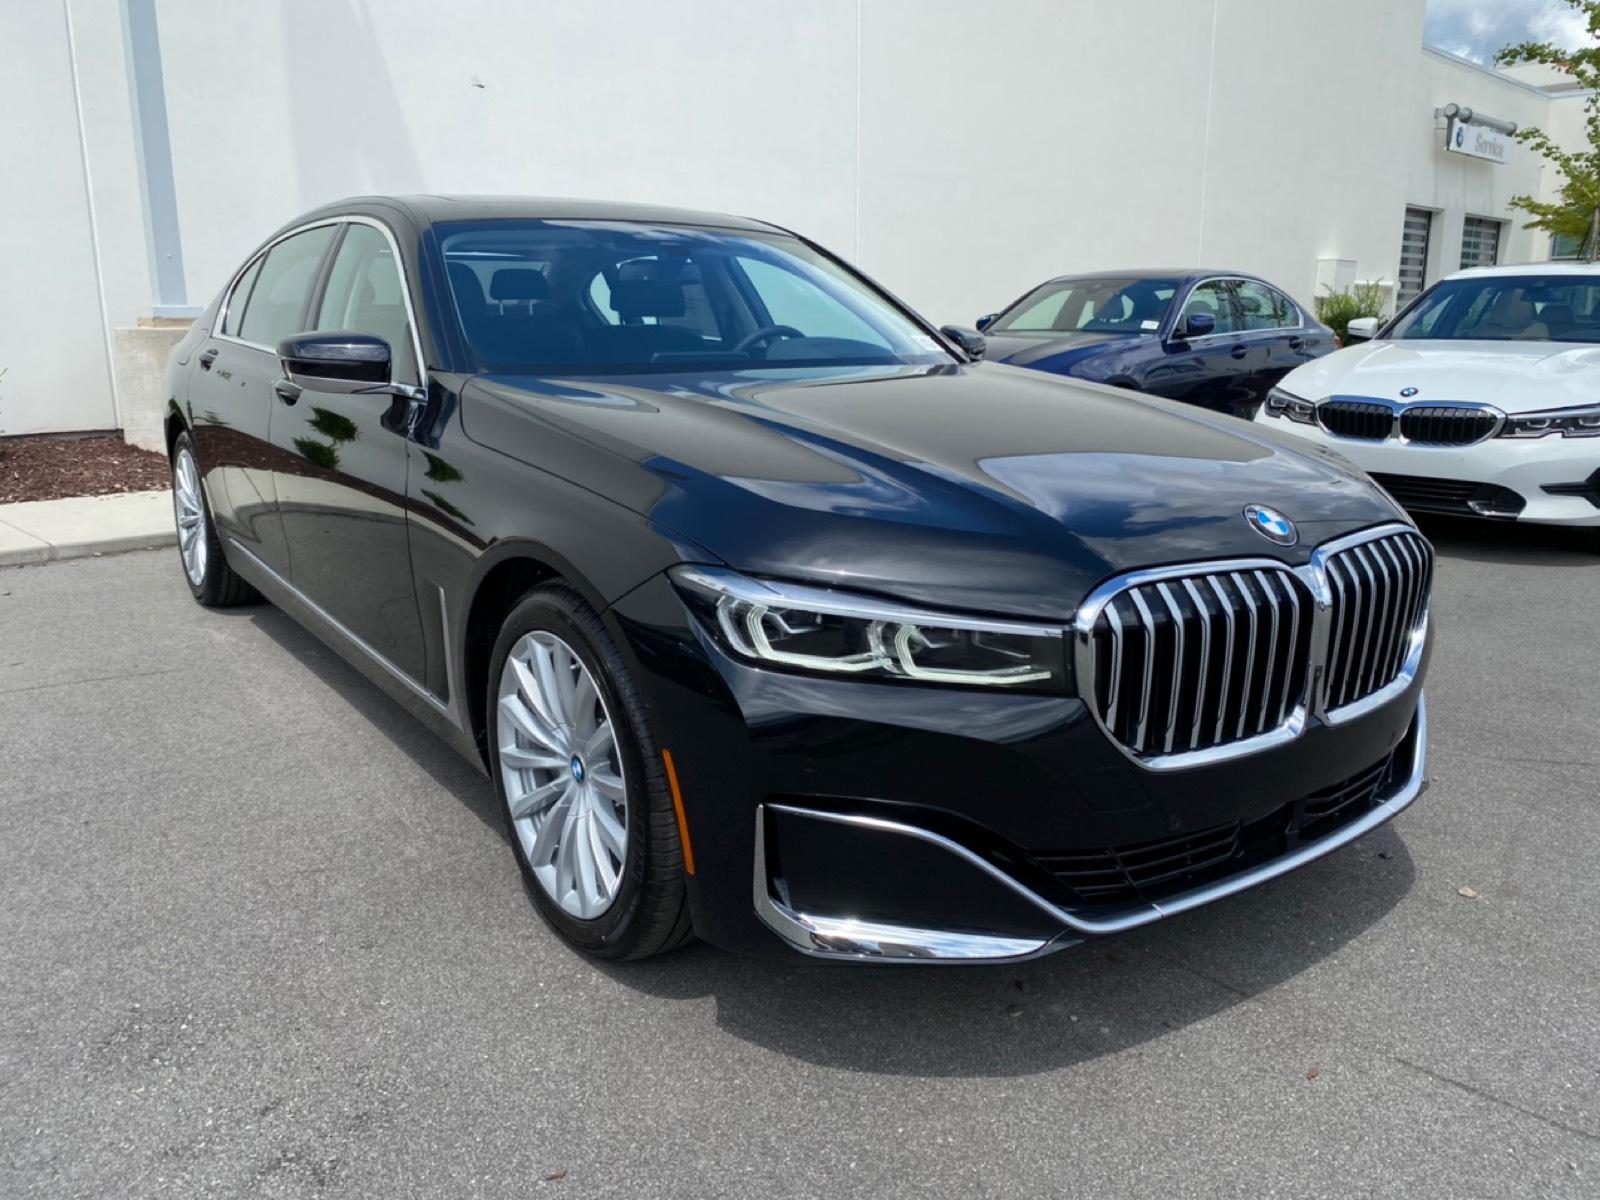 New 2021 BMW 740i For Sale Wilmington NC C3811